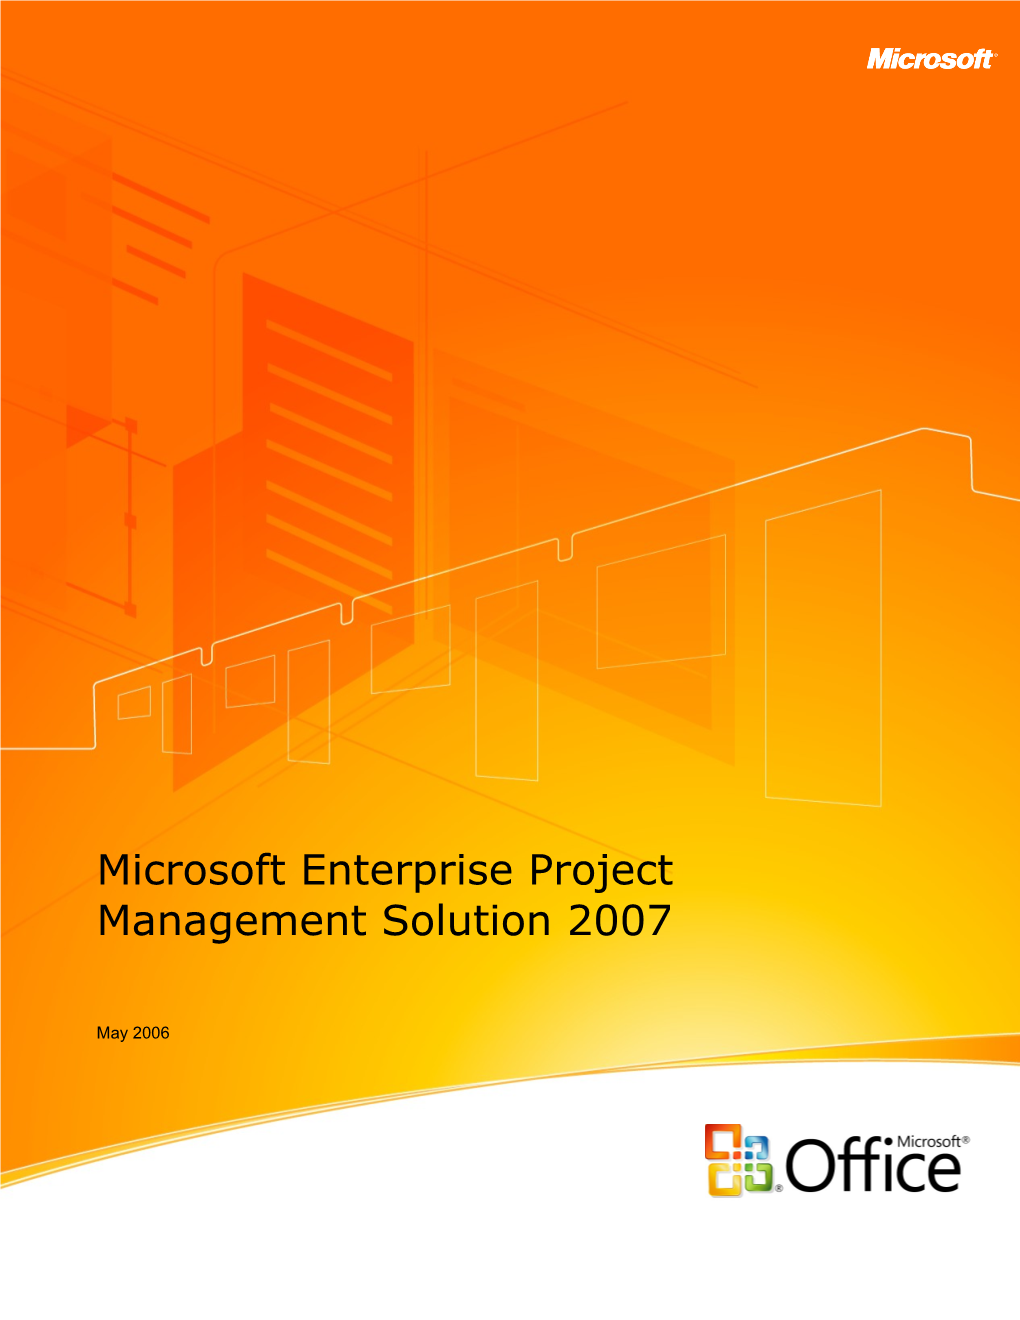 Overview of the Microsoft Enterprise Project Management Solution